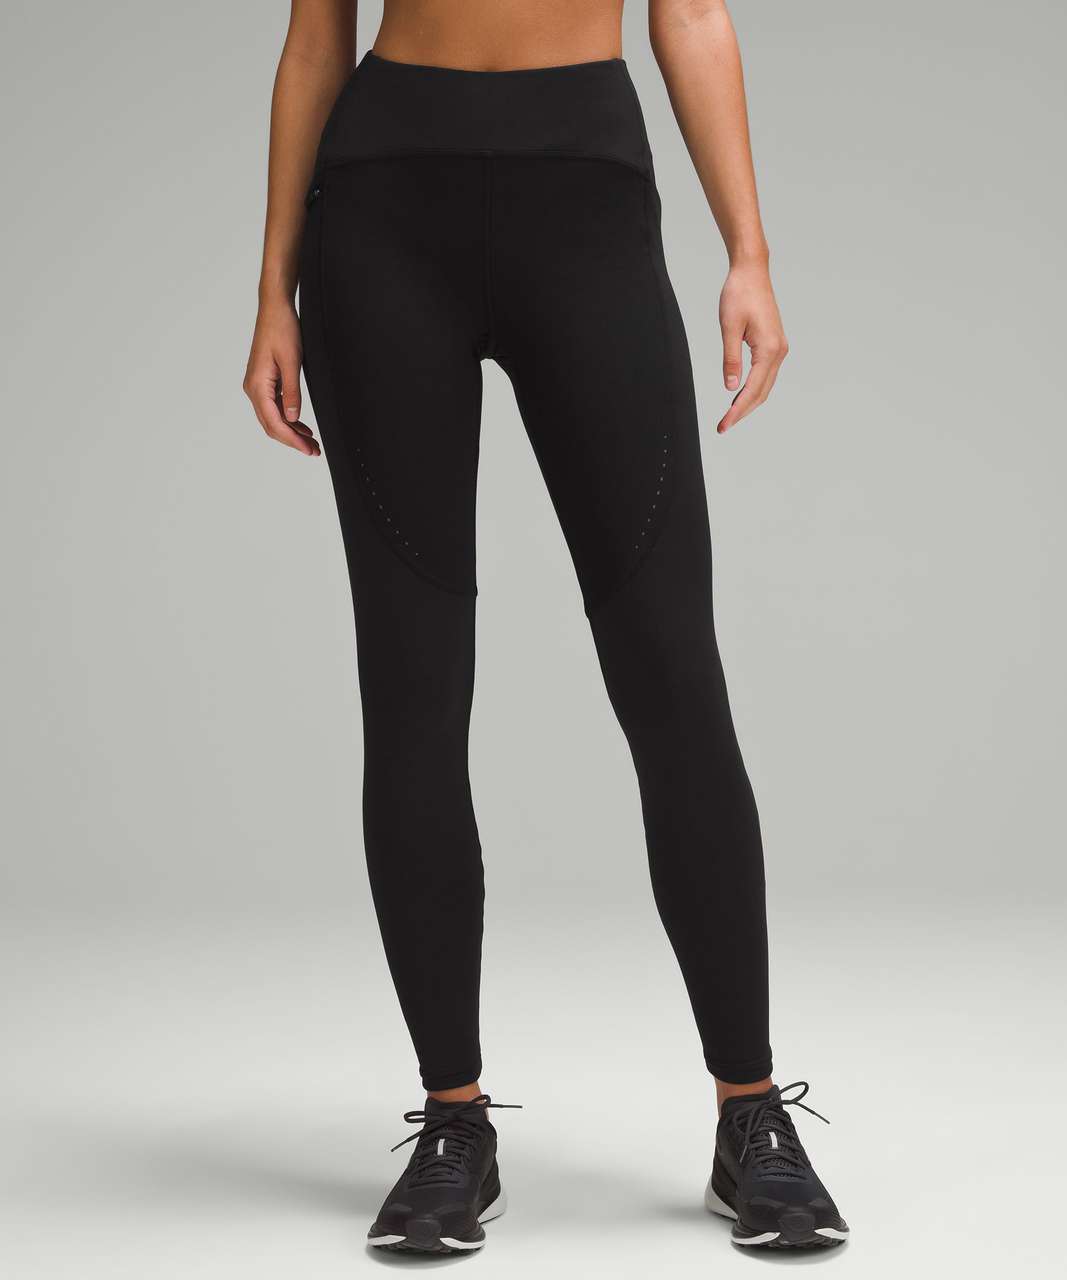 Lululemon Cold Weather High-Rise Running Tight 28" - Black